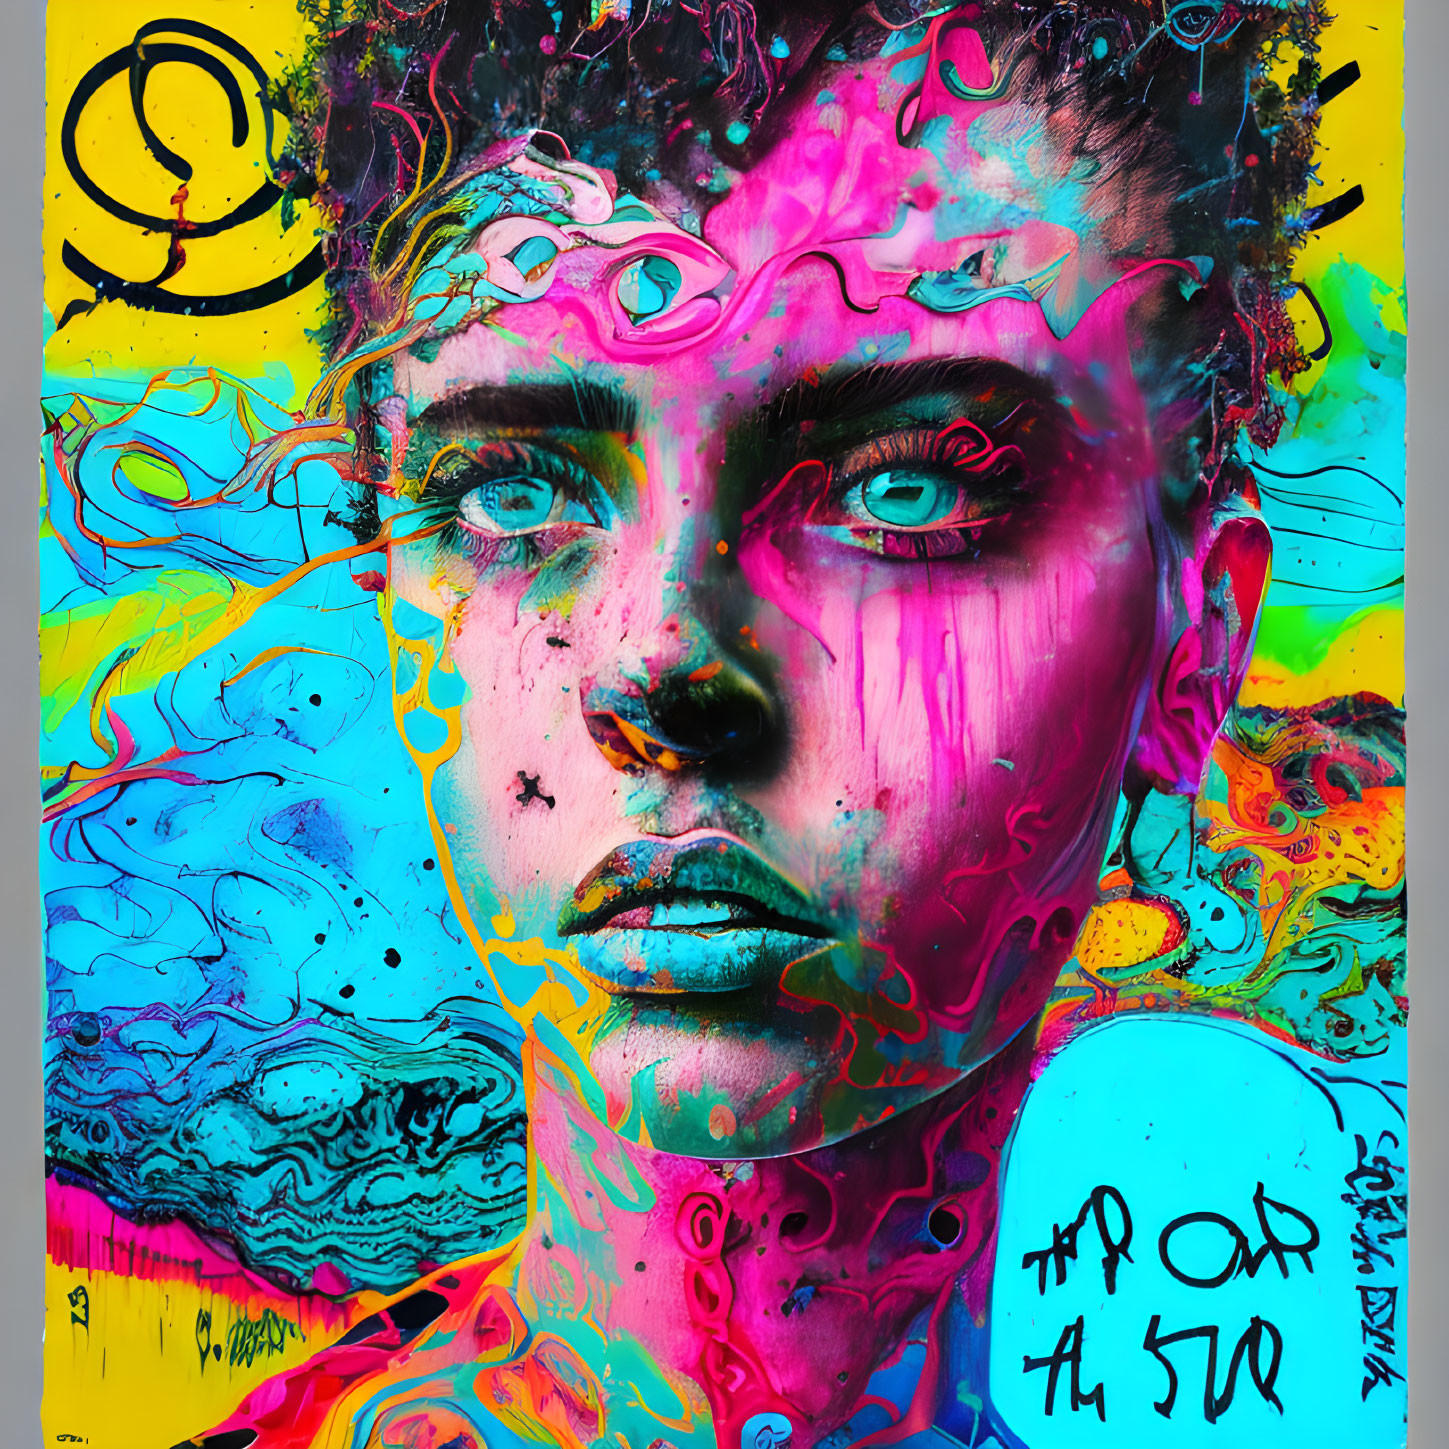 Colorful abstract portrait with dripping paint and expressive eyes